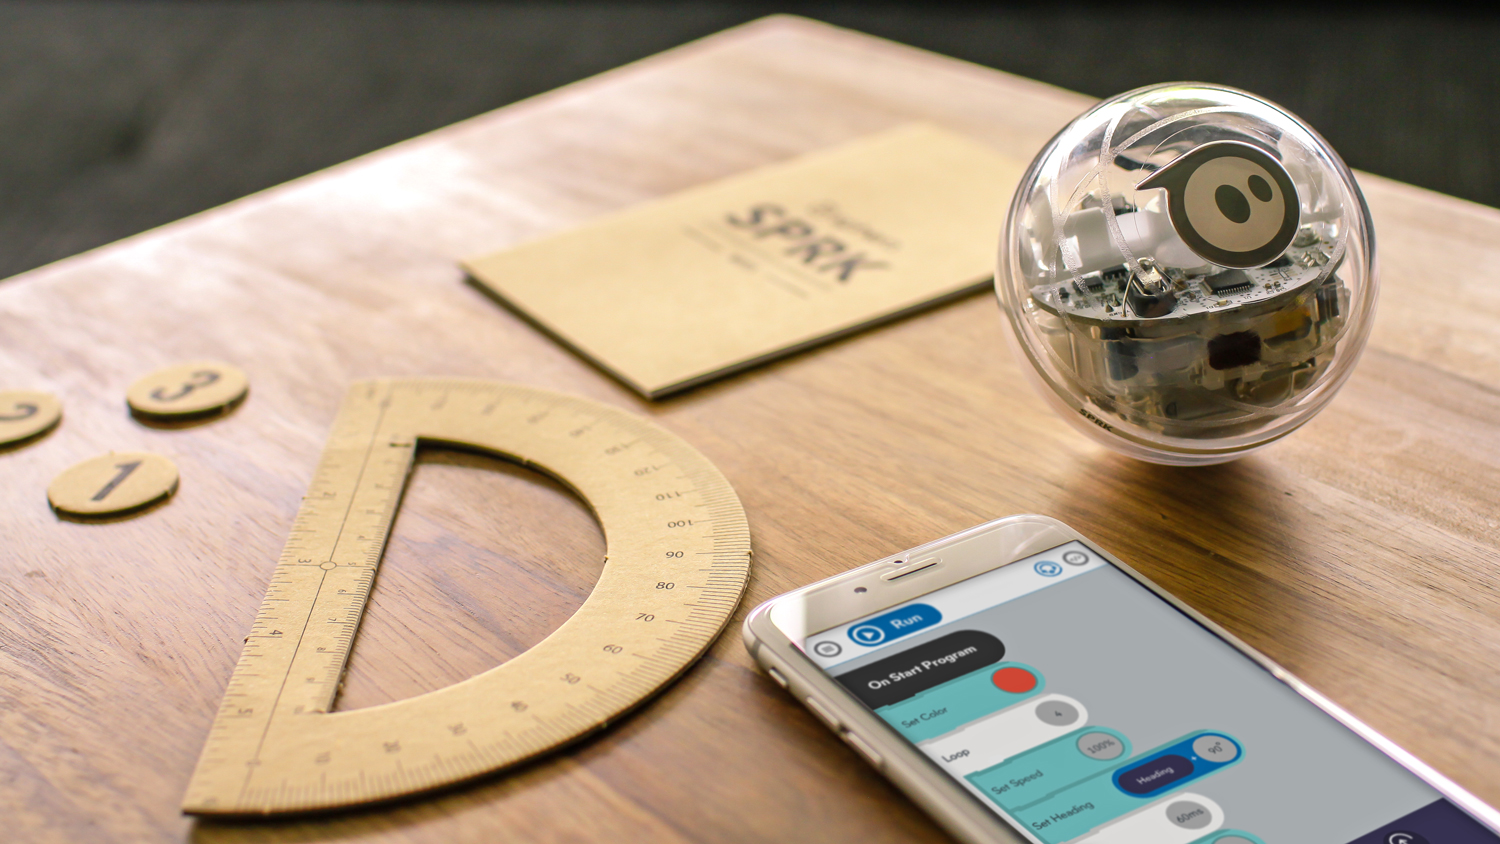 Bored With BB-8? Sphero’s SPRK App Lets You Reprogram Your Droid To Be Exciting Again